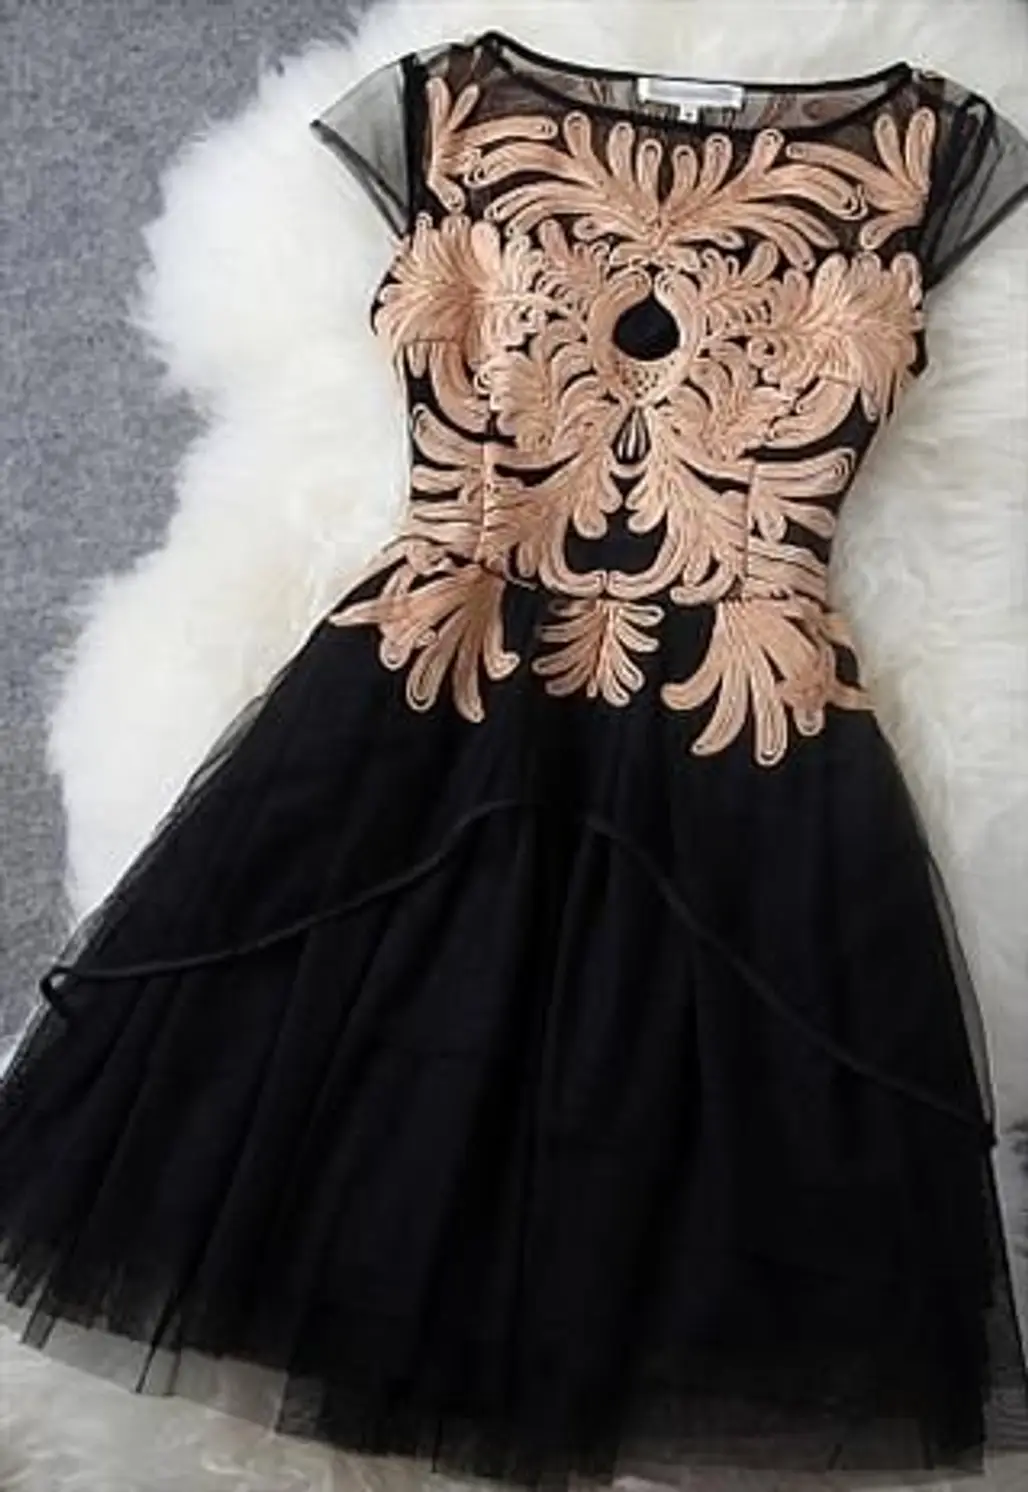 dress,clothing,black,gown,sleeve,